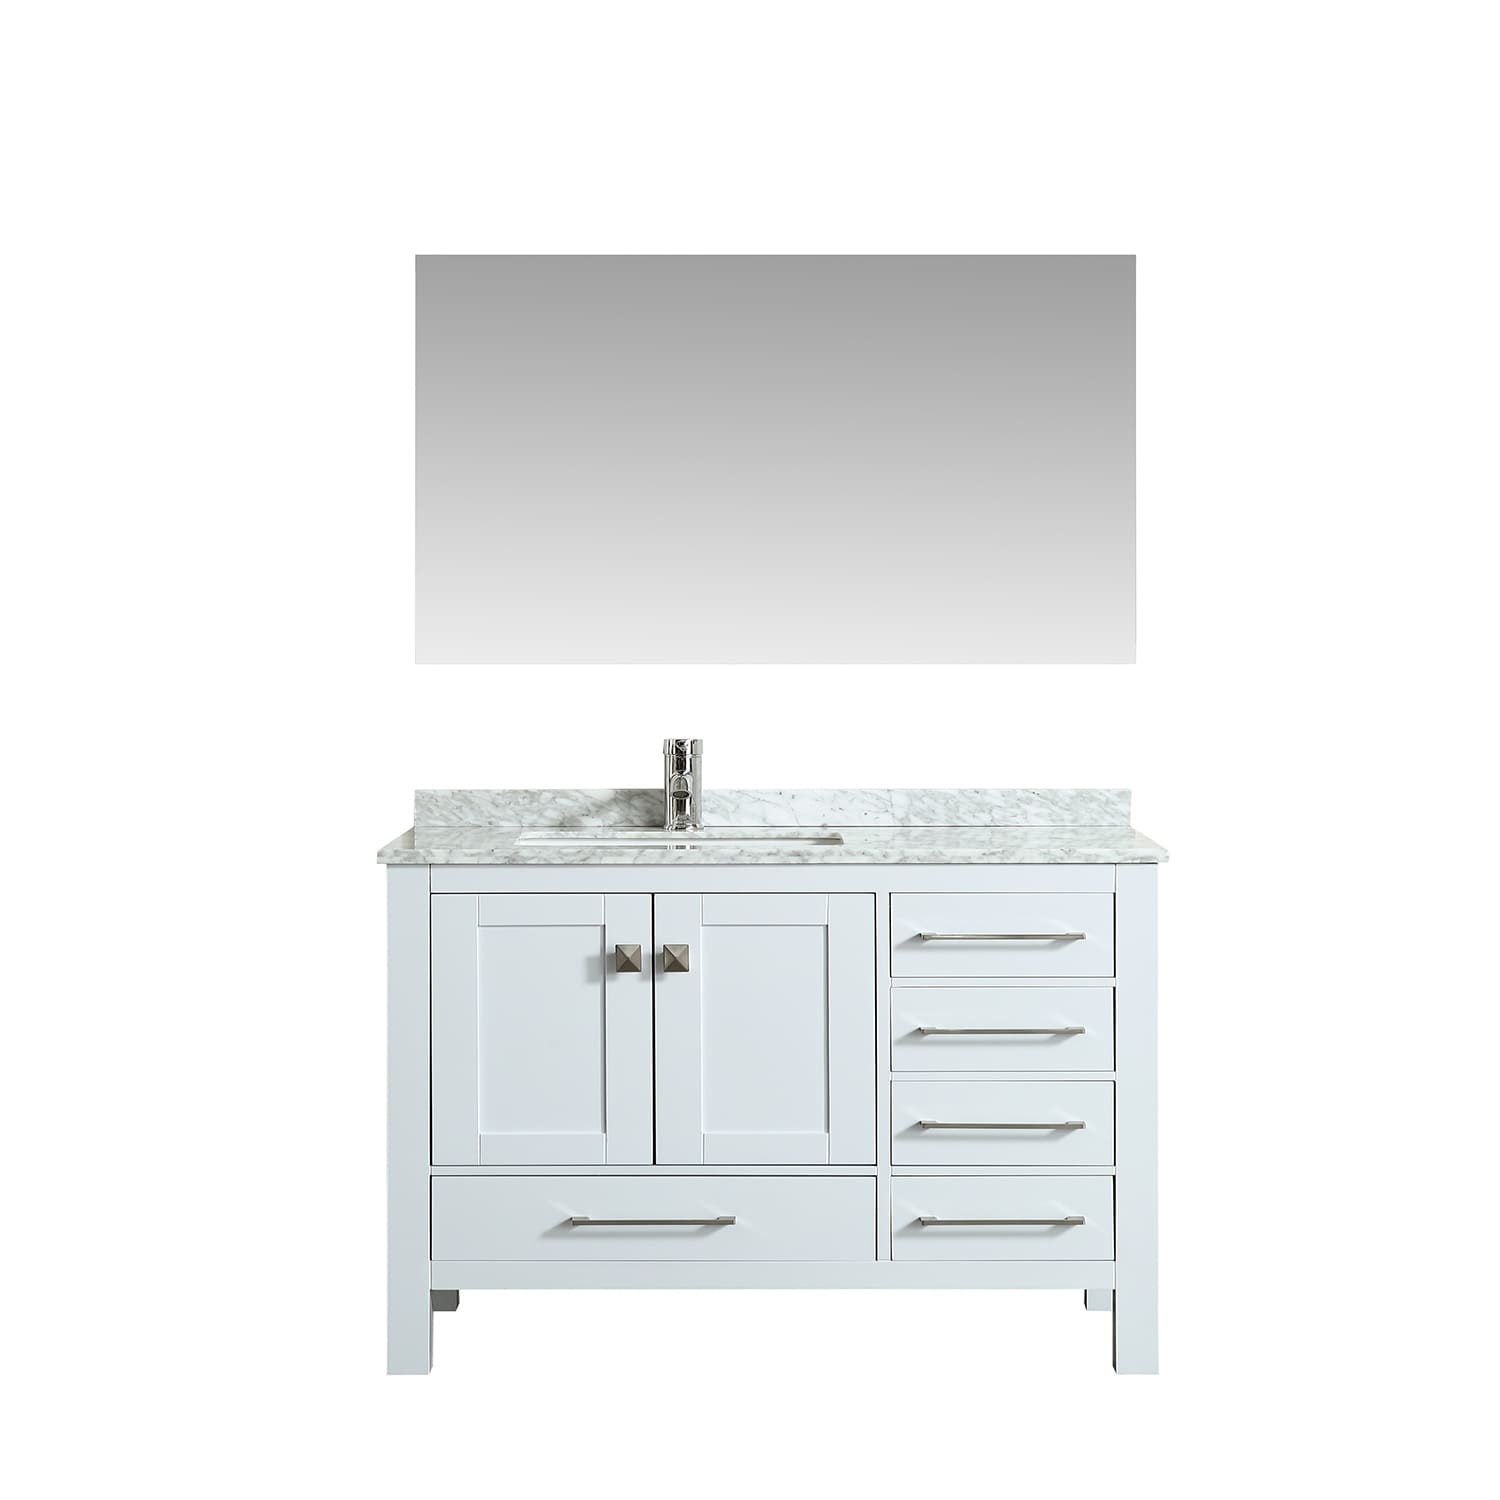 Shop Black Friday Deals On Eviva London 38 X 18 Inch White Transitional Bathroom Vanity With White Carrara Marble Countertop And Undermount Porcelain Sink Overstock 27276465